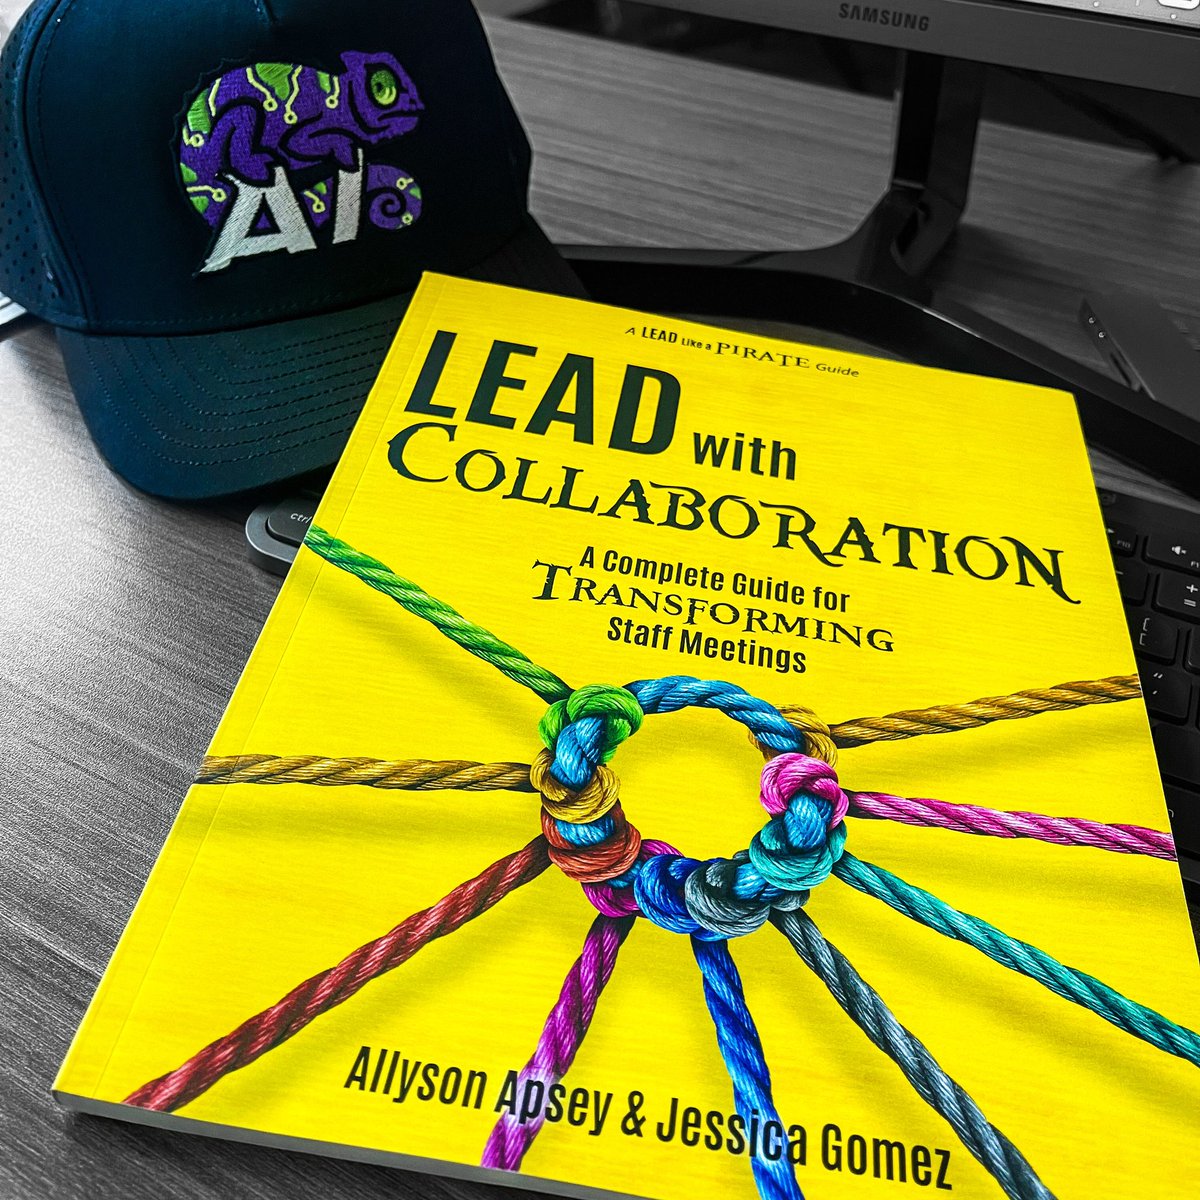 Digging into some amazing reading around collaboration #LeadwithCollaboration as we prep for the new year. Huge shout out to @drrenaebryant for the book. Can’t wait to dig into this and be apart of the #ldrshpbkchat #EdBranding #summerlearning @allysonapsey @mrsjessgomez